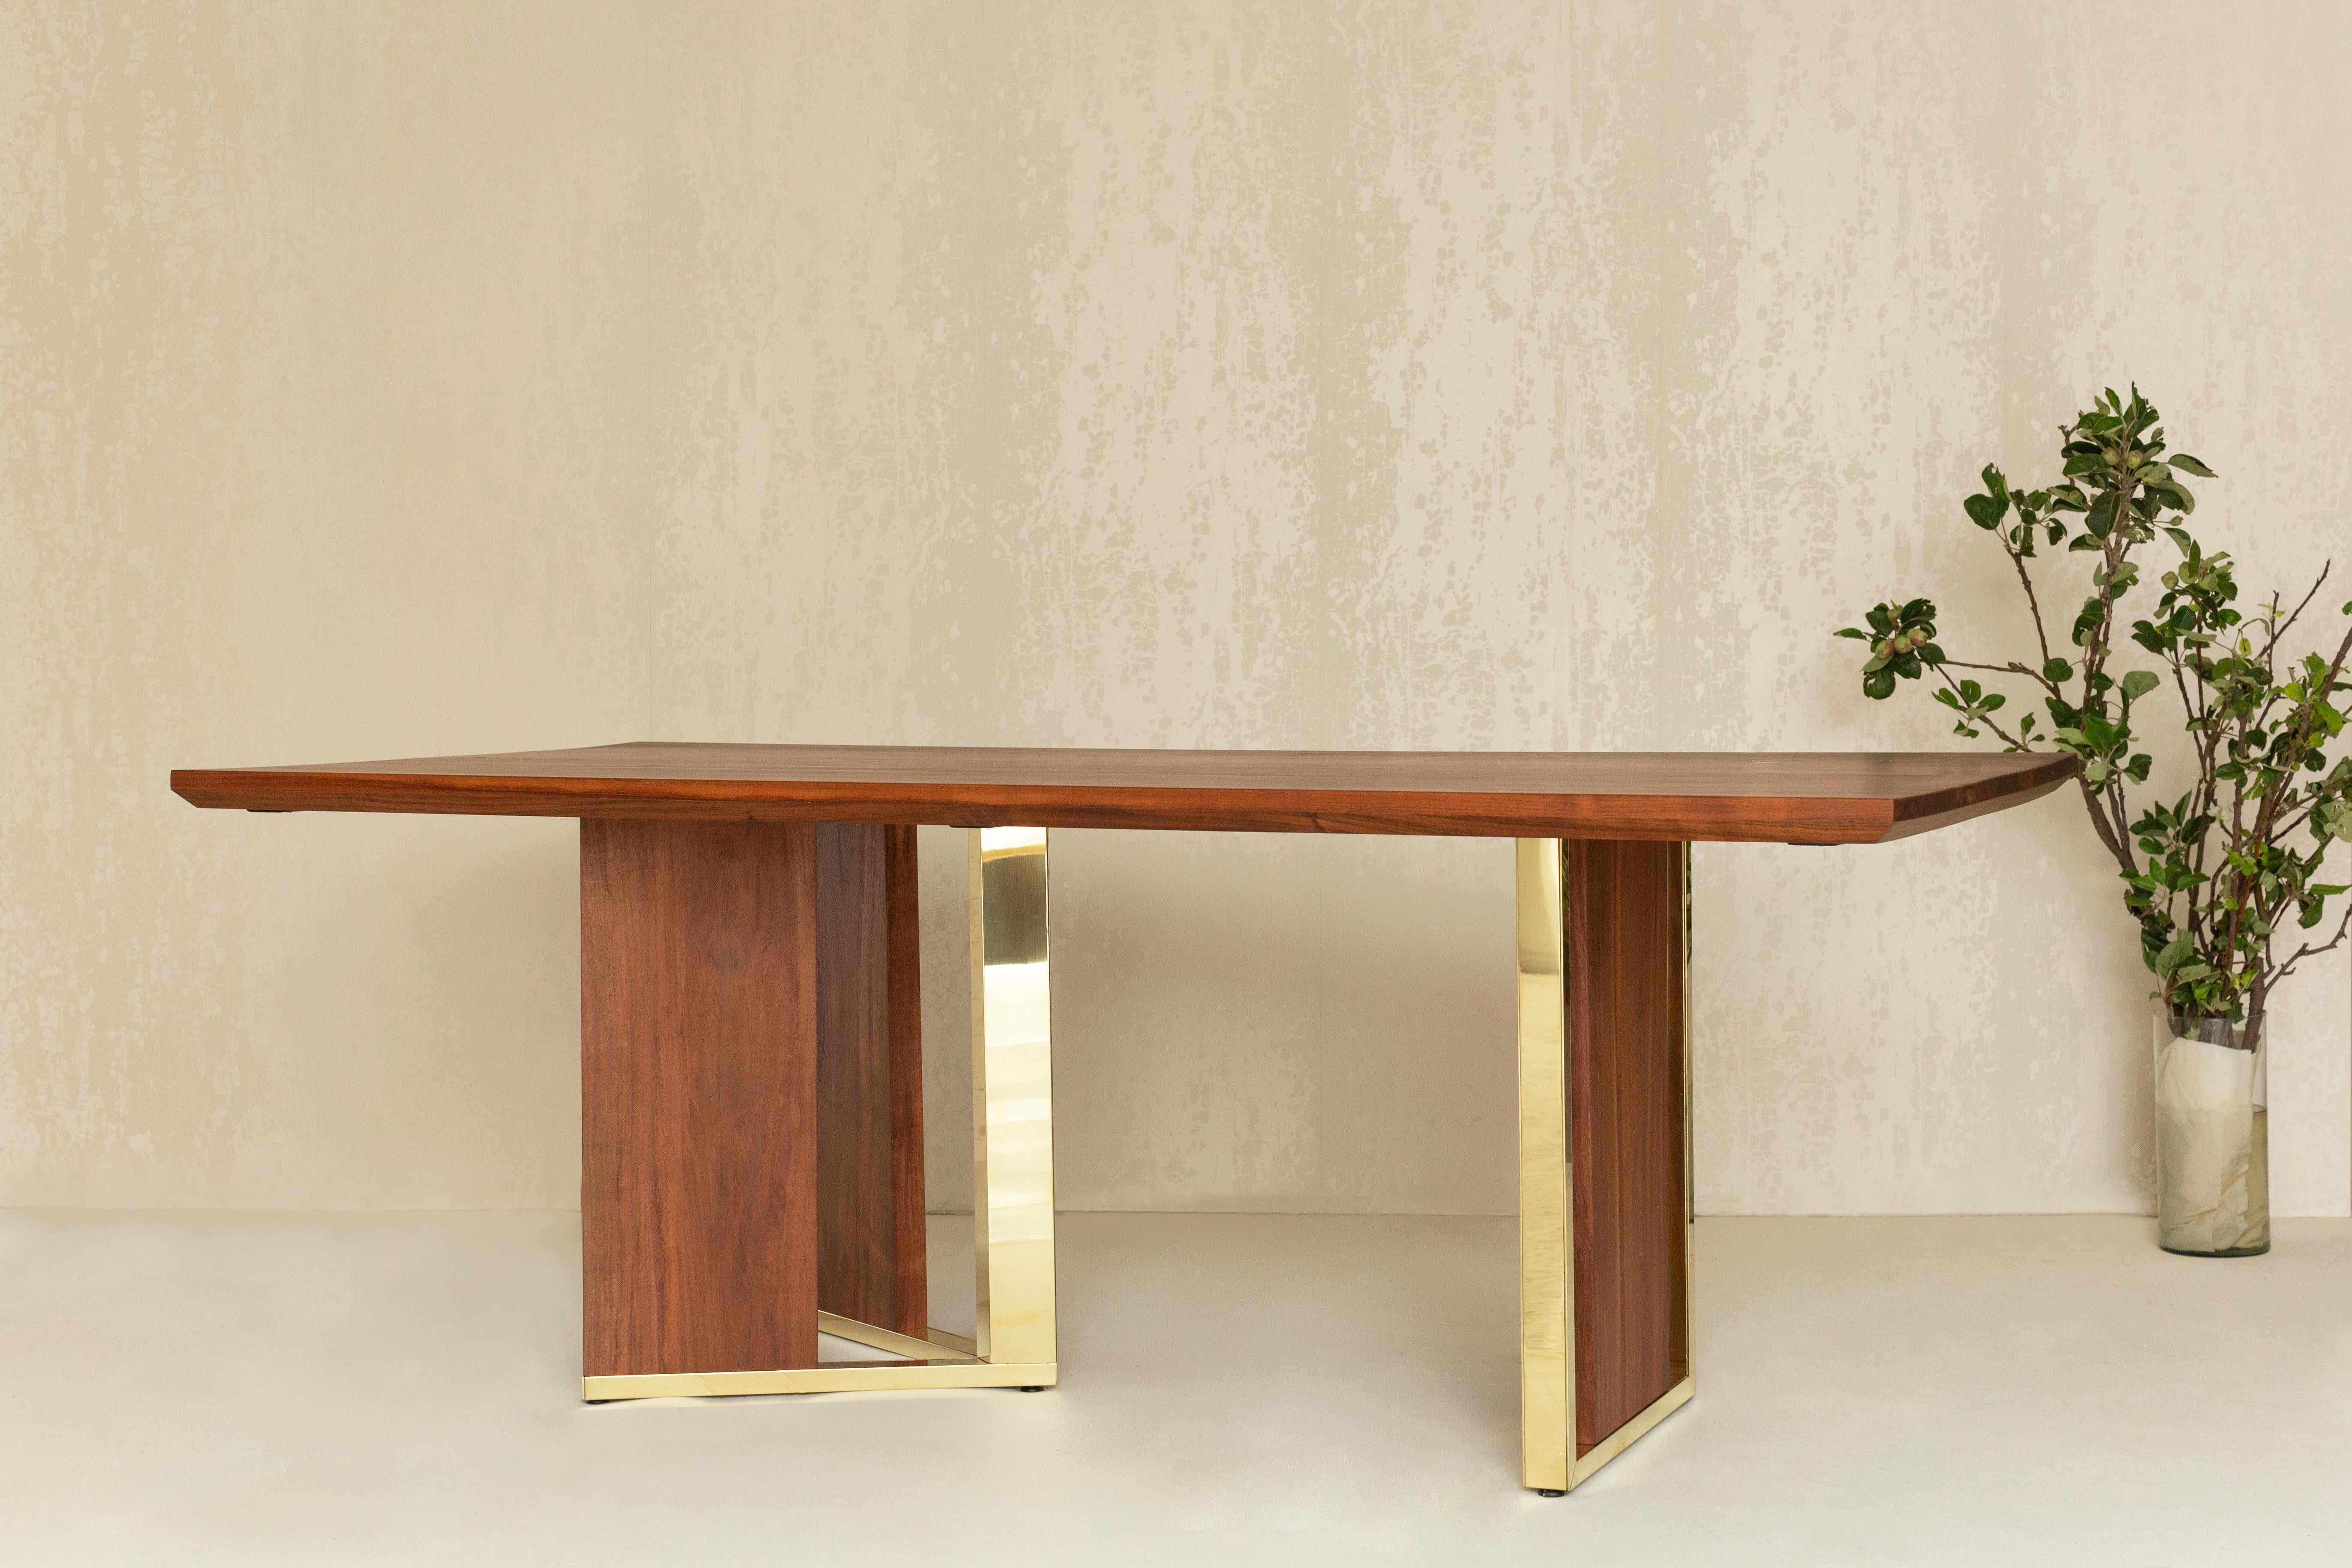 Mid-Century Modern Pollan Table Made in Tzalam Wood and Brass Details by Tana Karei For Sale